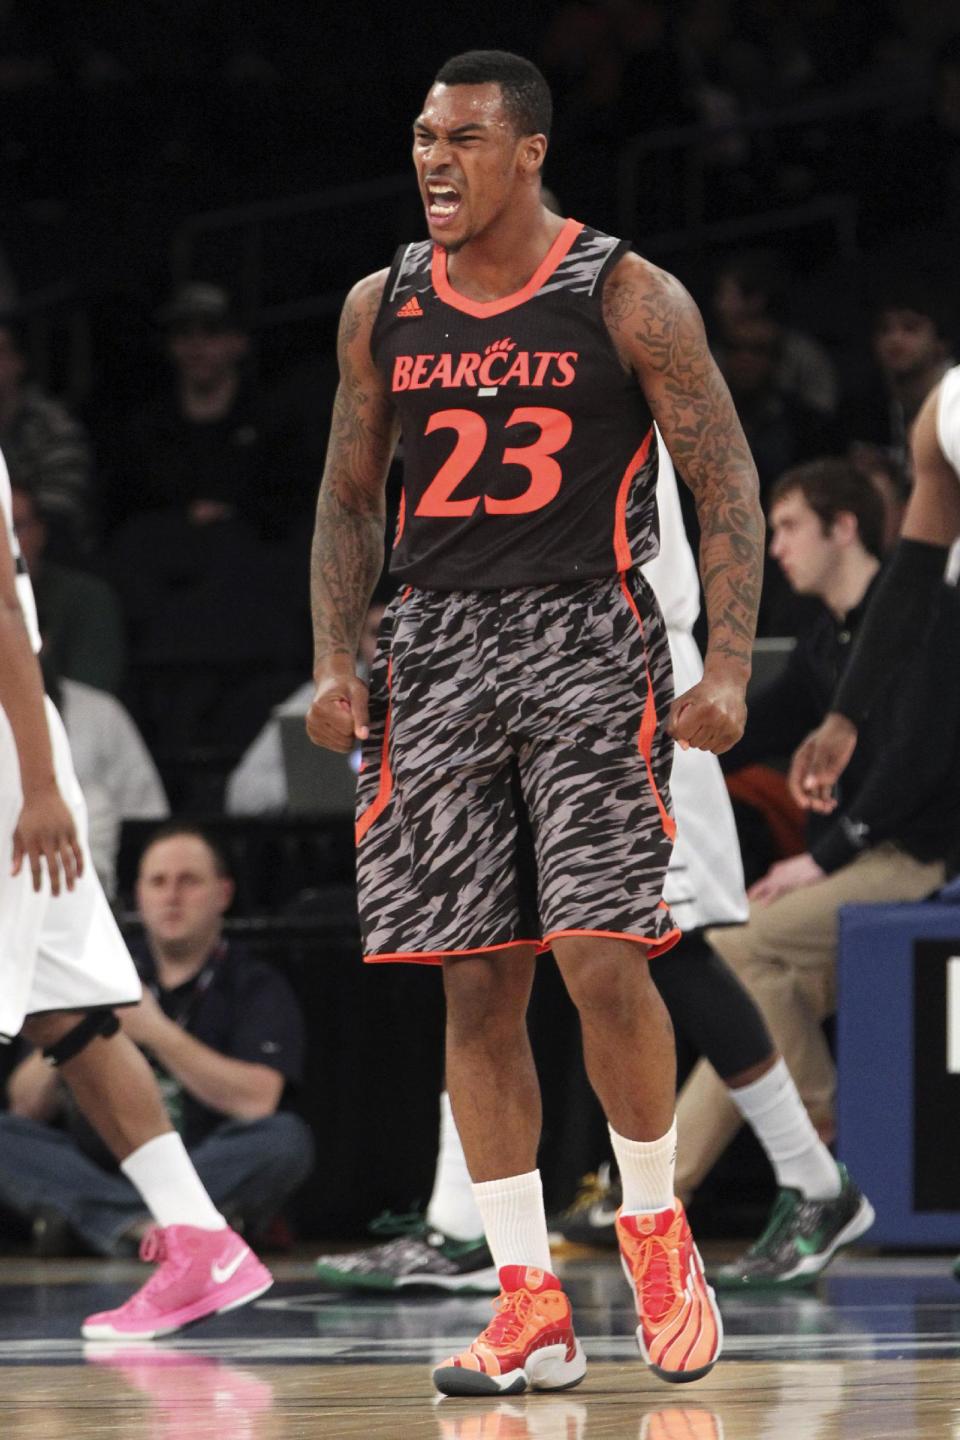 FILE - This March 13, 2013 file photo shows Cincinnati's Sean Kilpatrick reacting after making a basket during the first half of an NCAA college basketball game against Providence at the Big East Conference tournament in New York. The neon-colored jerseys and camouflage-covered shorts debuted by six teams in their post-season conference championships ahead of the NCAA men's basketball tournament weren't well received in the press and social media. The changes happened to be in line with fashion runways and in recreational athleticwear, where highlighter brights and creative camo have been bona fide trends, and alternate uniforms have become part of the college football and basketball landscape, but on the court, these uniforms still made fans cringe. (AP Photo/Mary Altaffer, file)